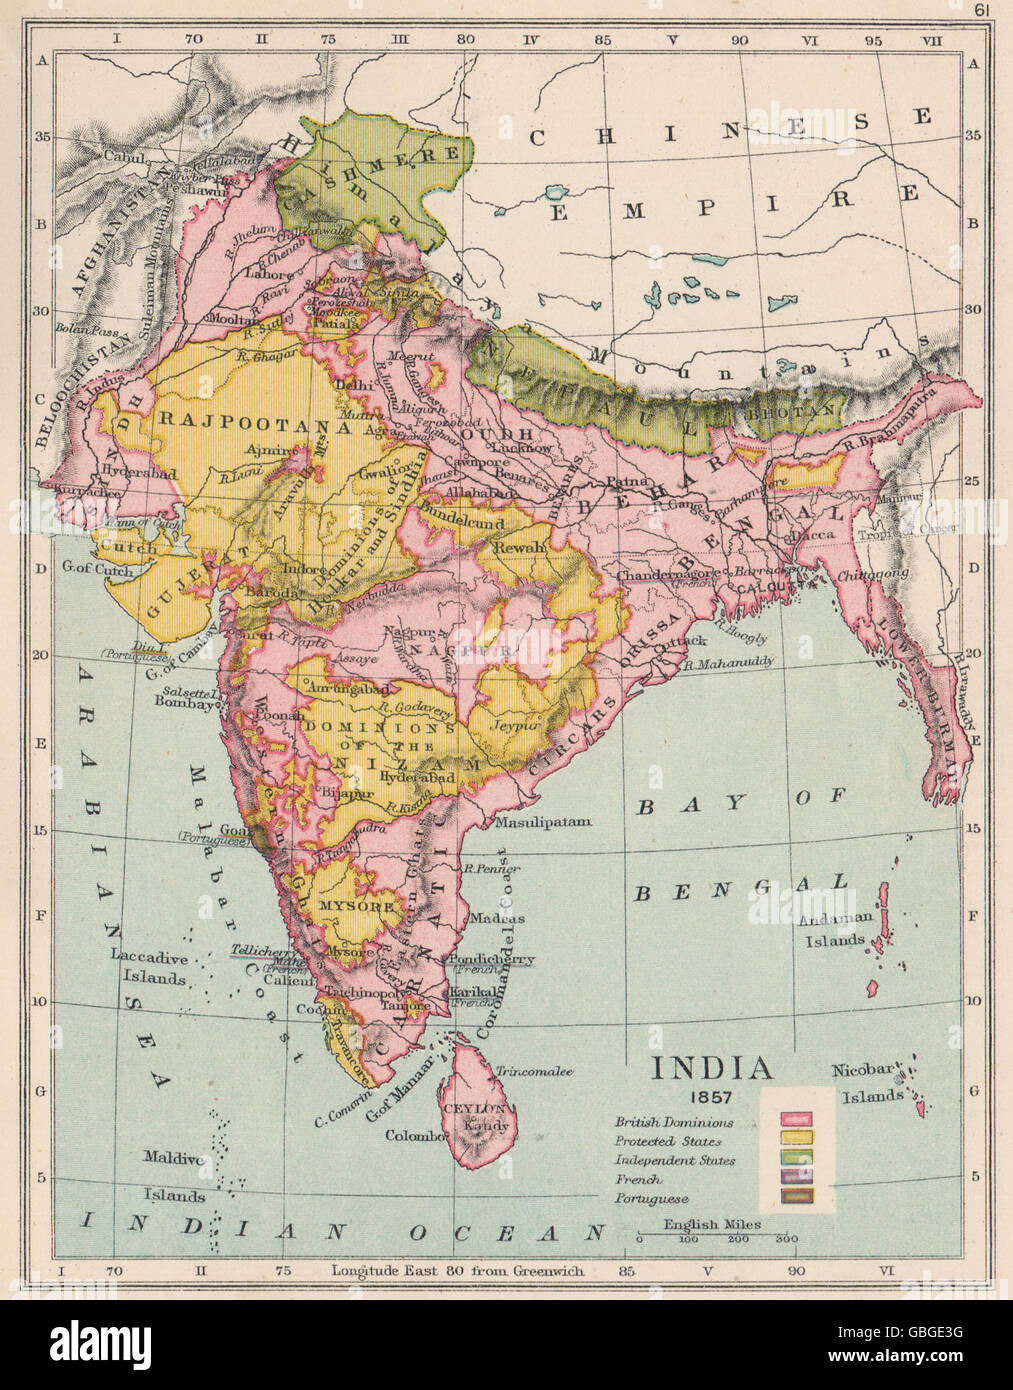 BRITISH INDIA 1857: Independent Kashmir. Protected states (yellow ...